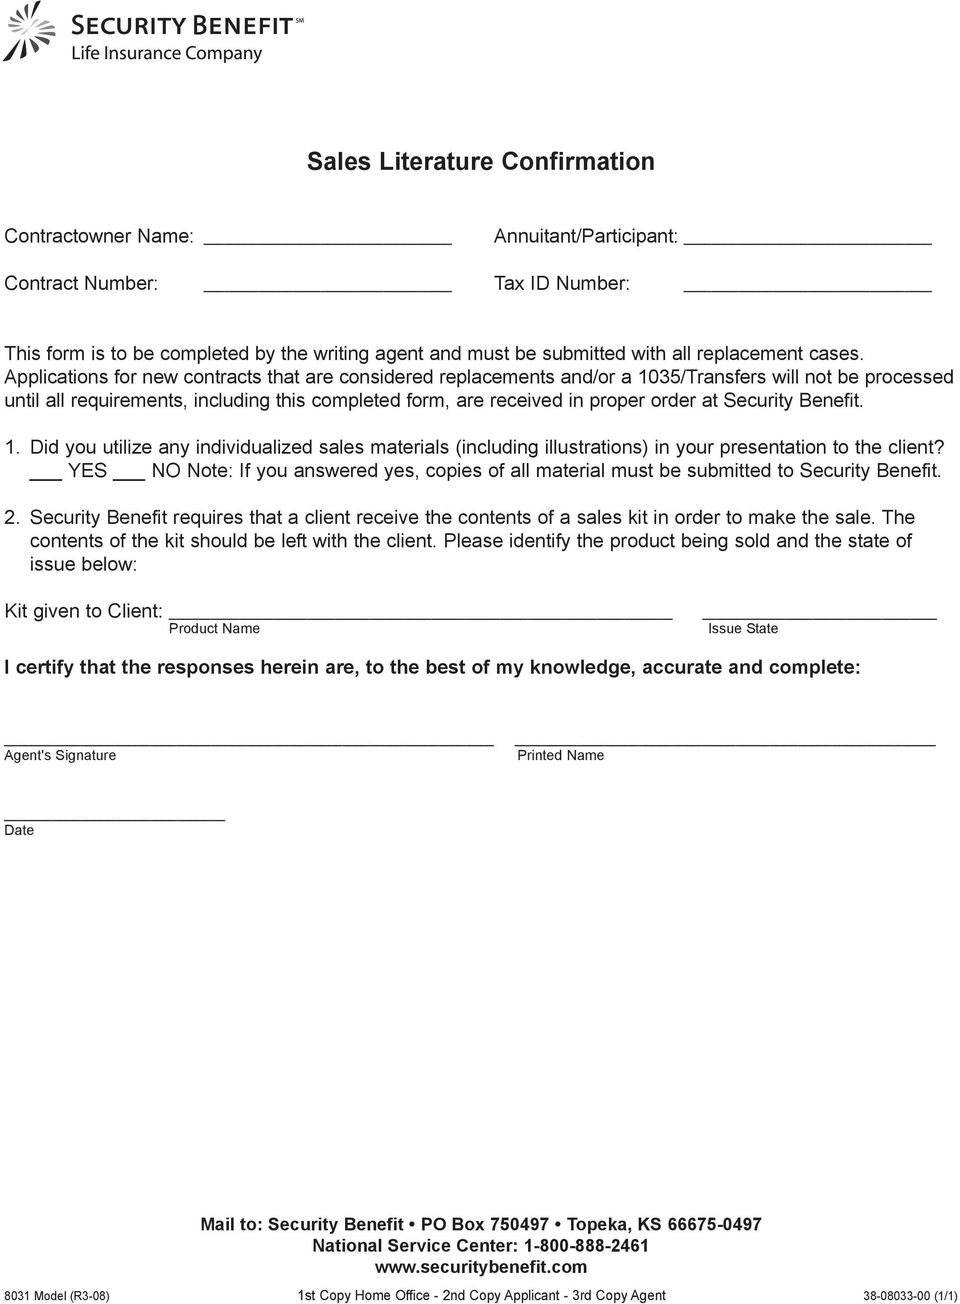 Applications for new contracts that are considered replacements and/or a 1035/Transfers will not be processed until all requirements, including this completed form, are received in proper order at